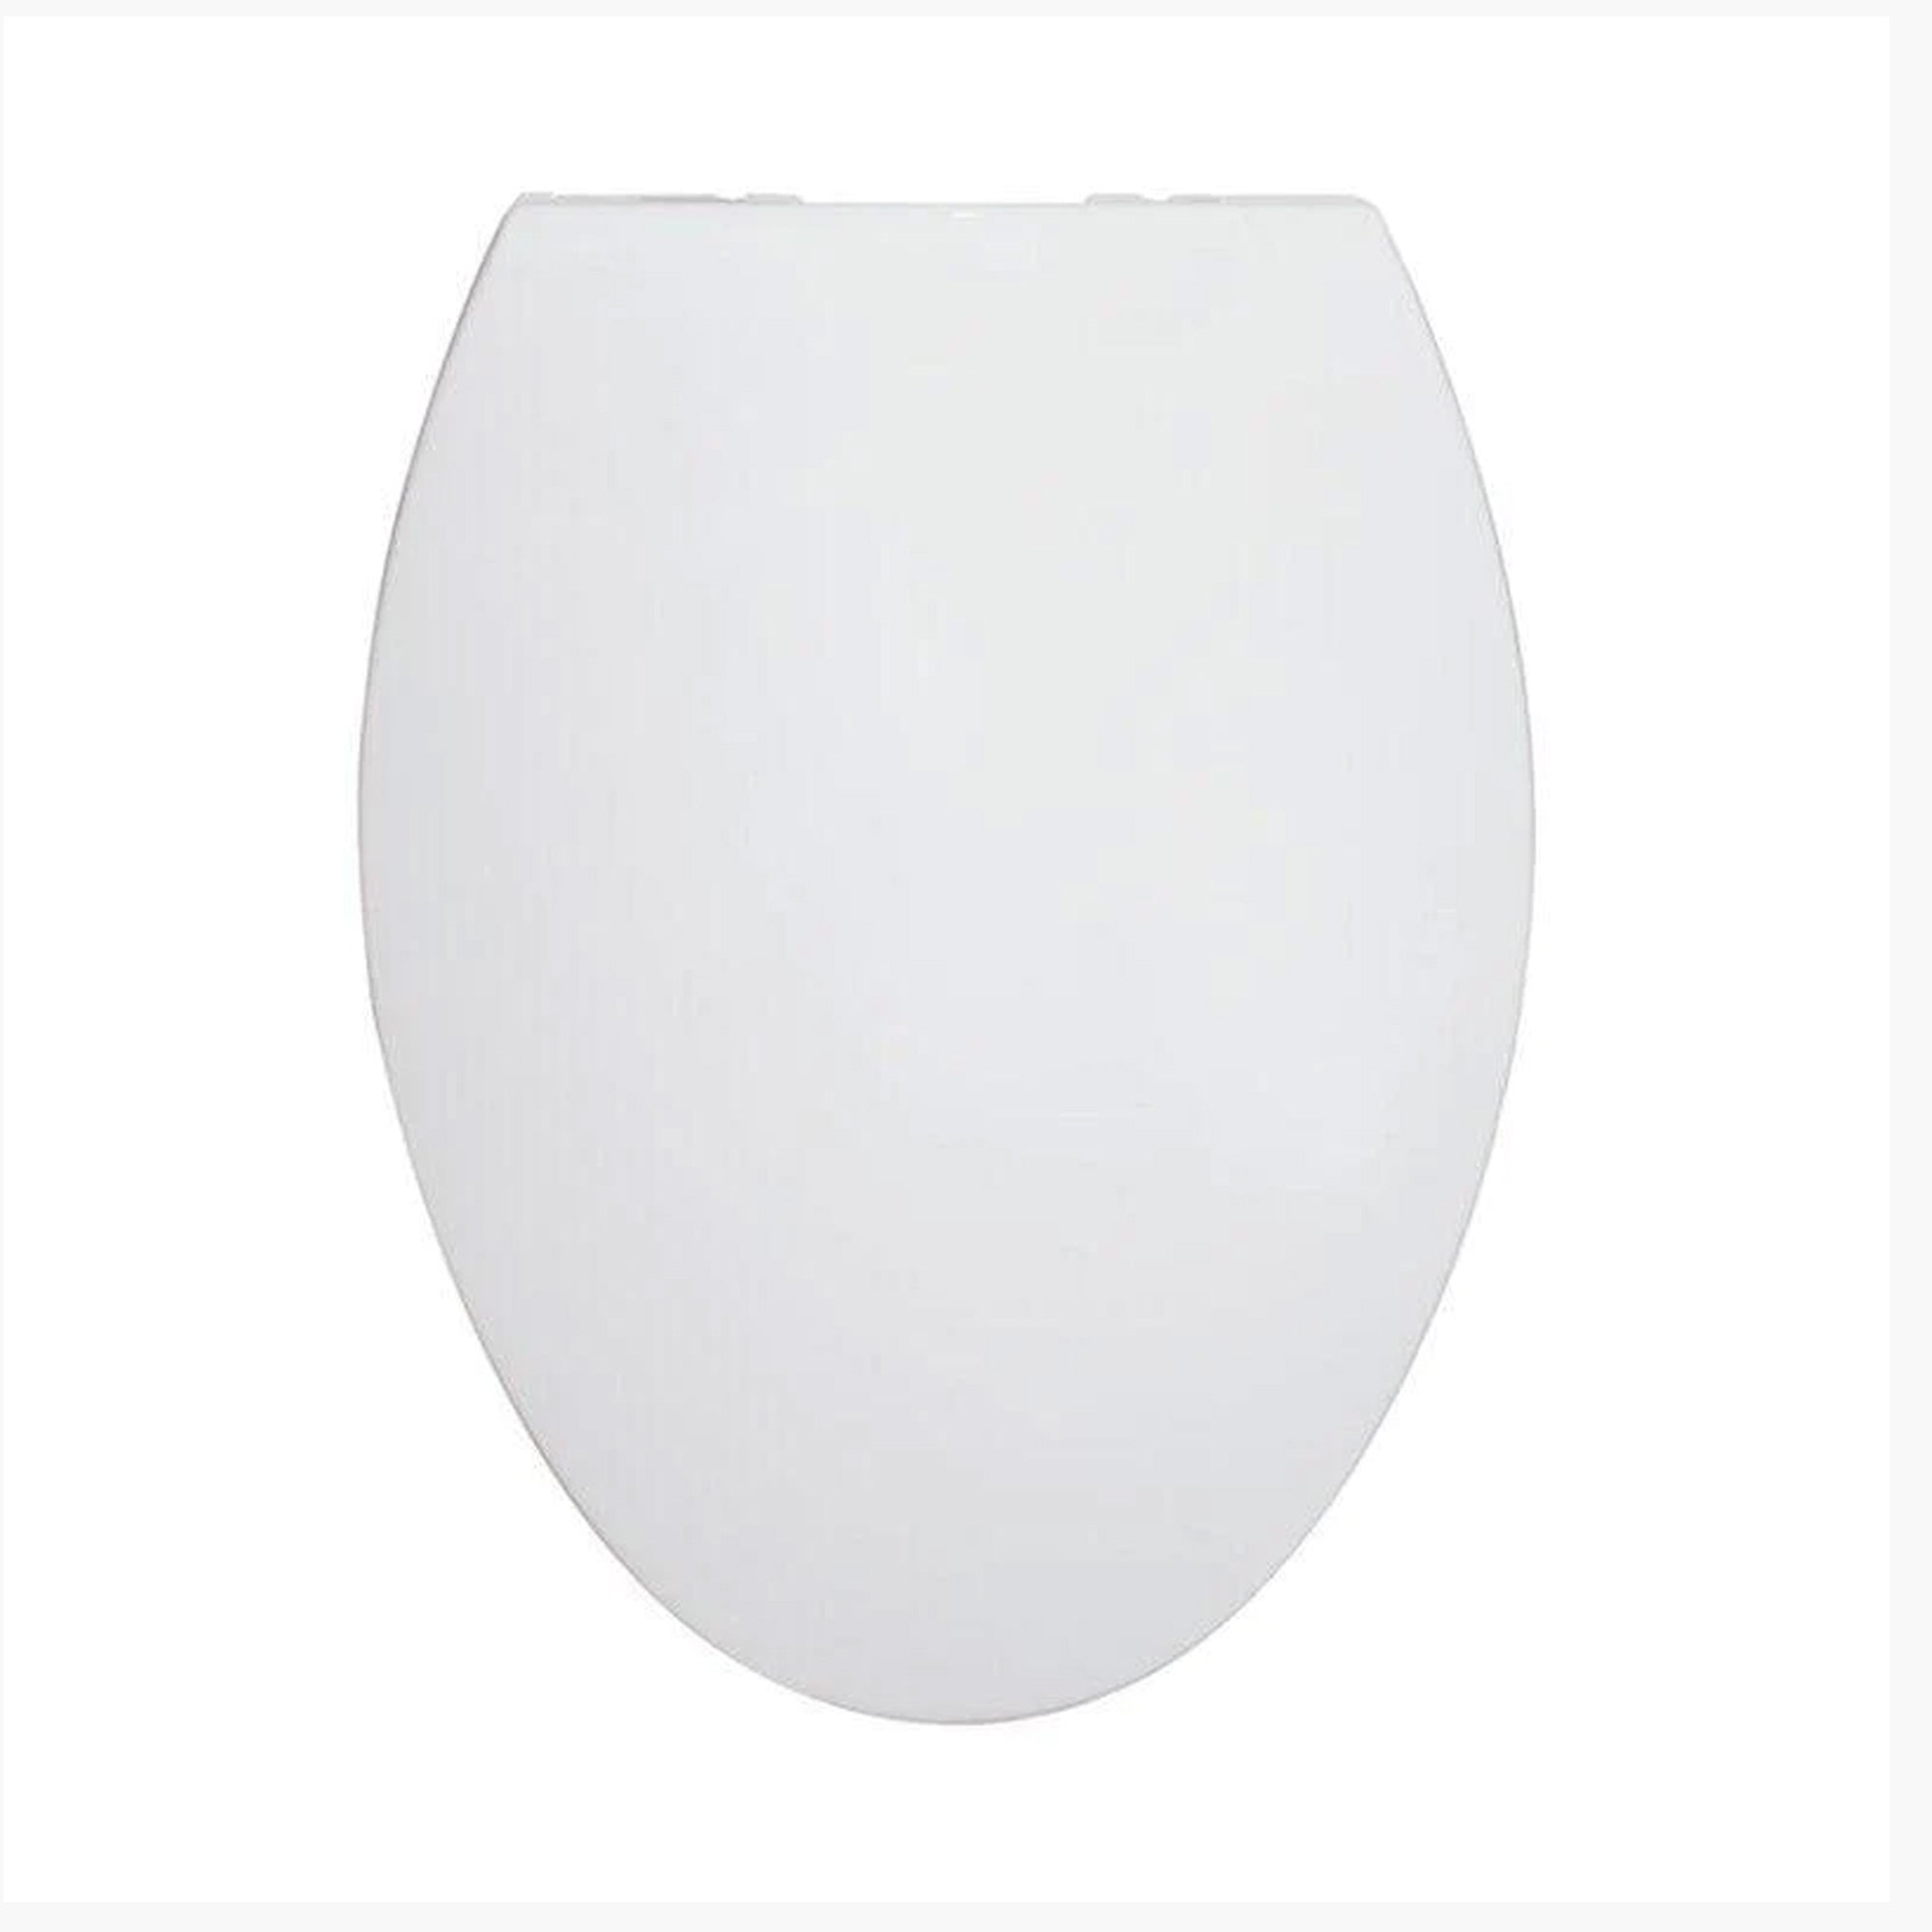 HOROW T0337W Elongated Toilet Seat With PP Material Model PP-8737